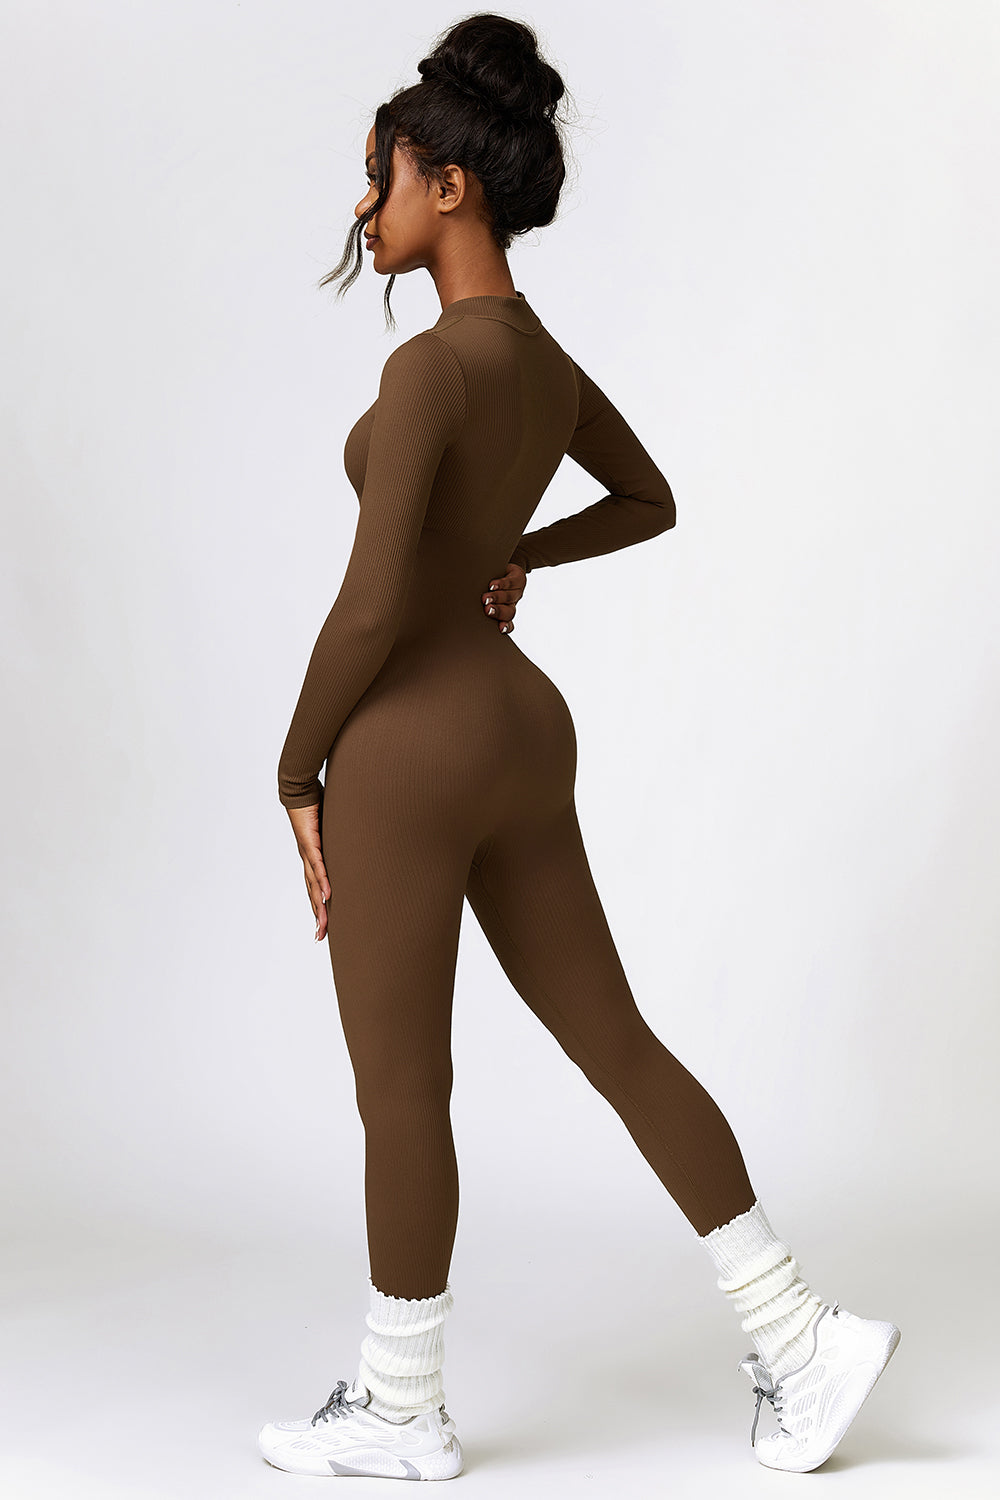 a woman wearing a brown bodysuit and white sneakers